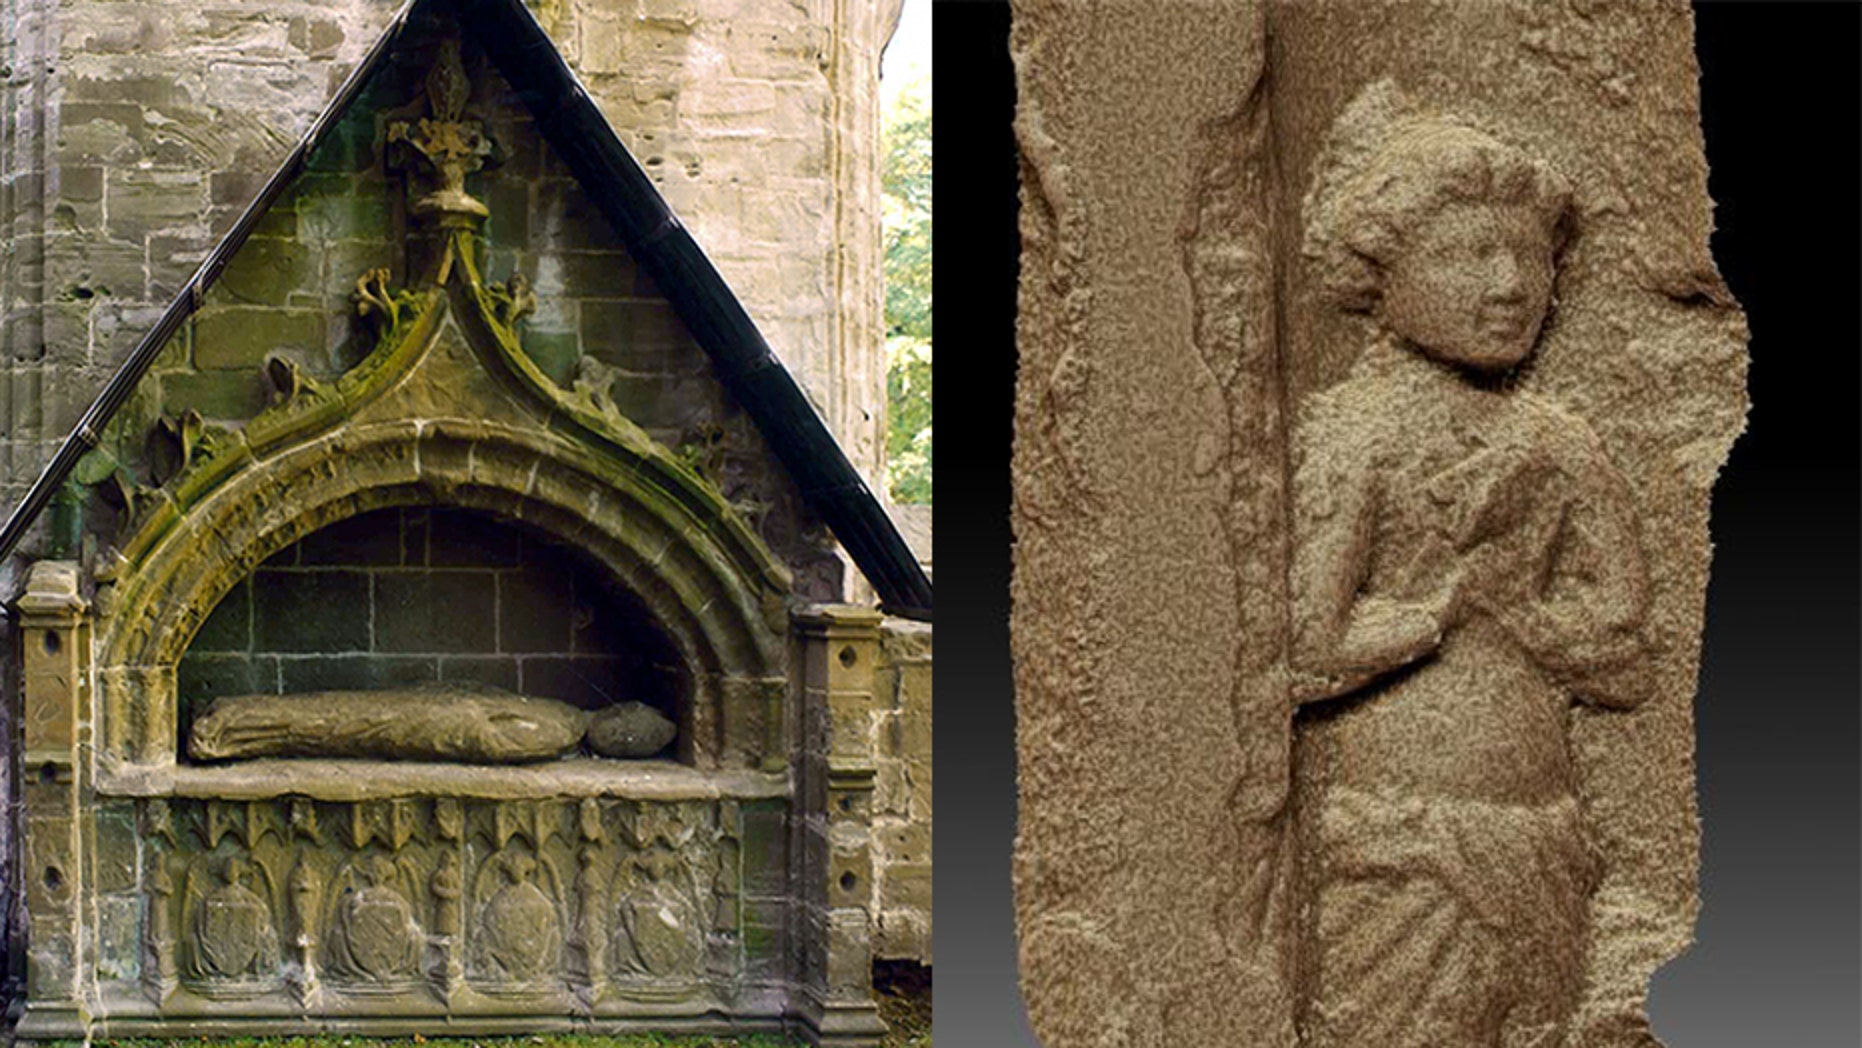 Stone carvings hidden for centuries re-discovered at Scotland’s Dunkeld Cathedral 